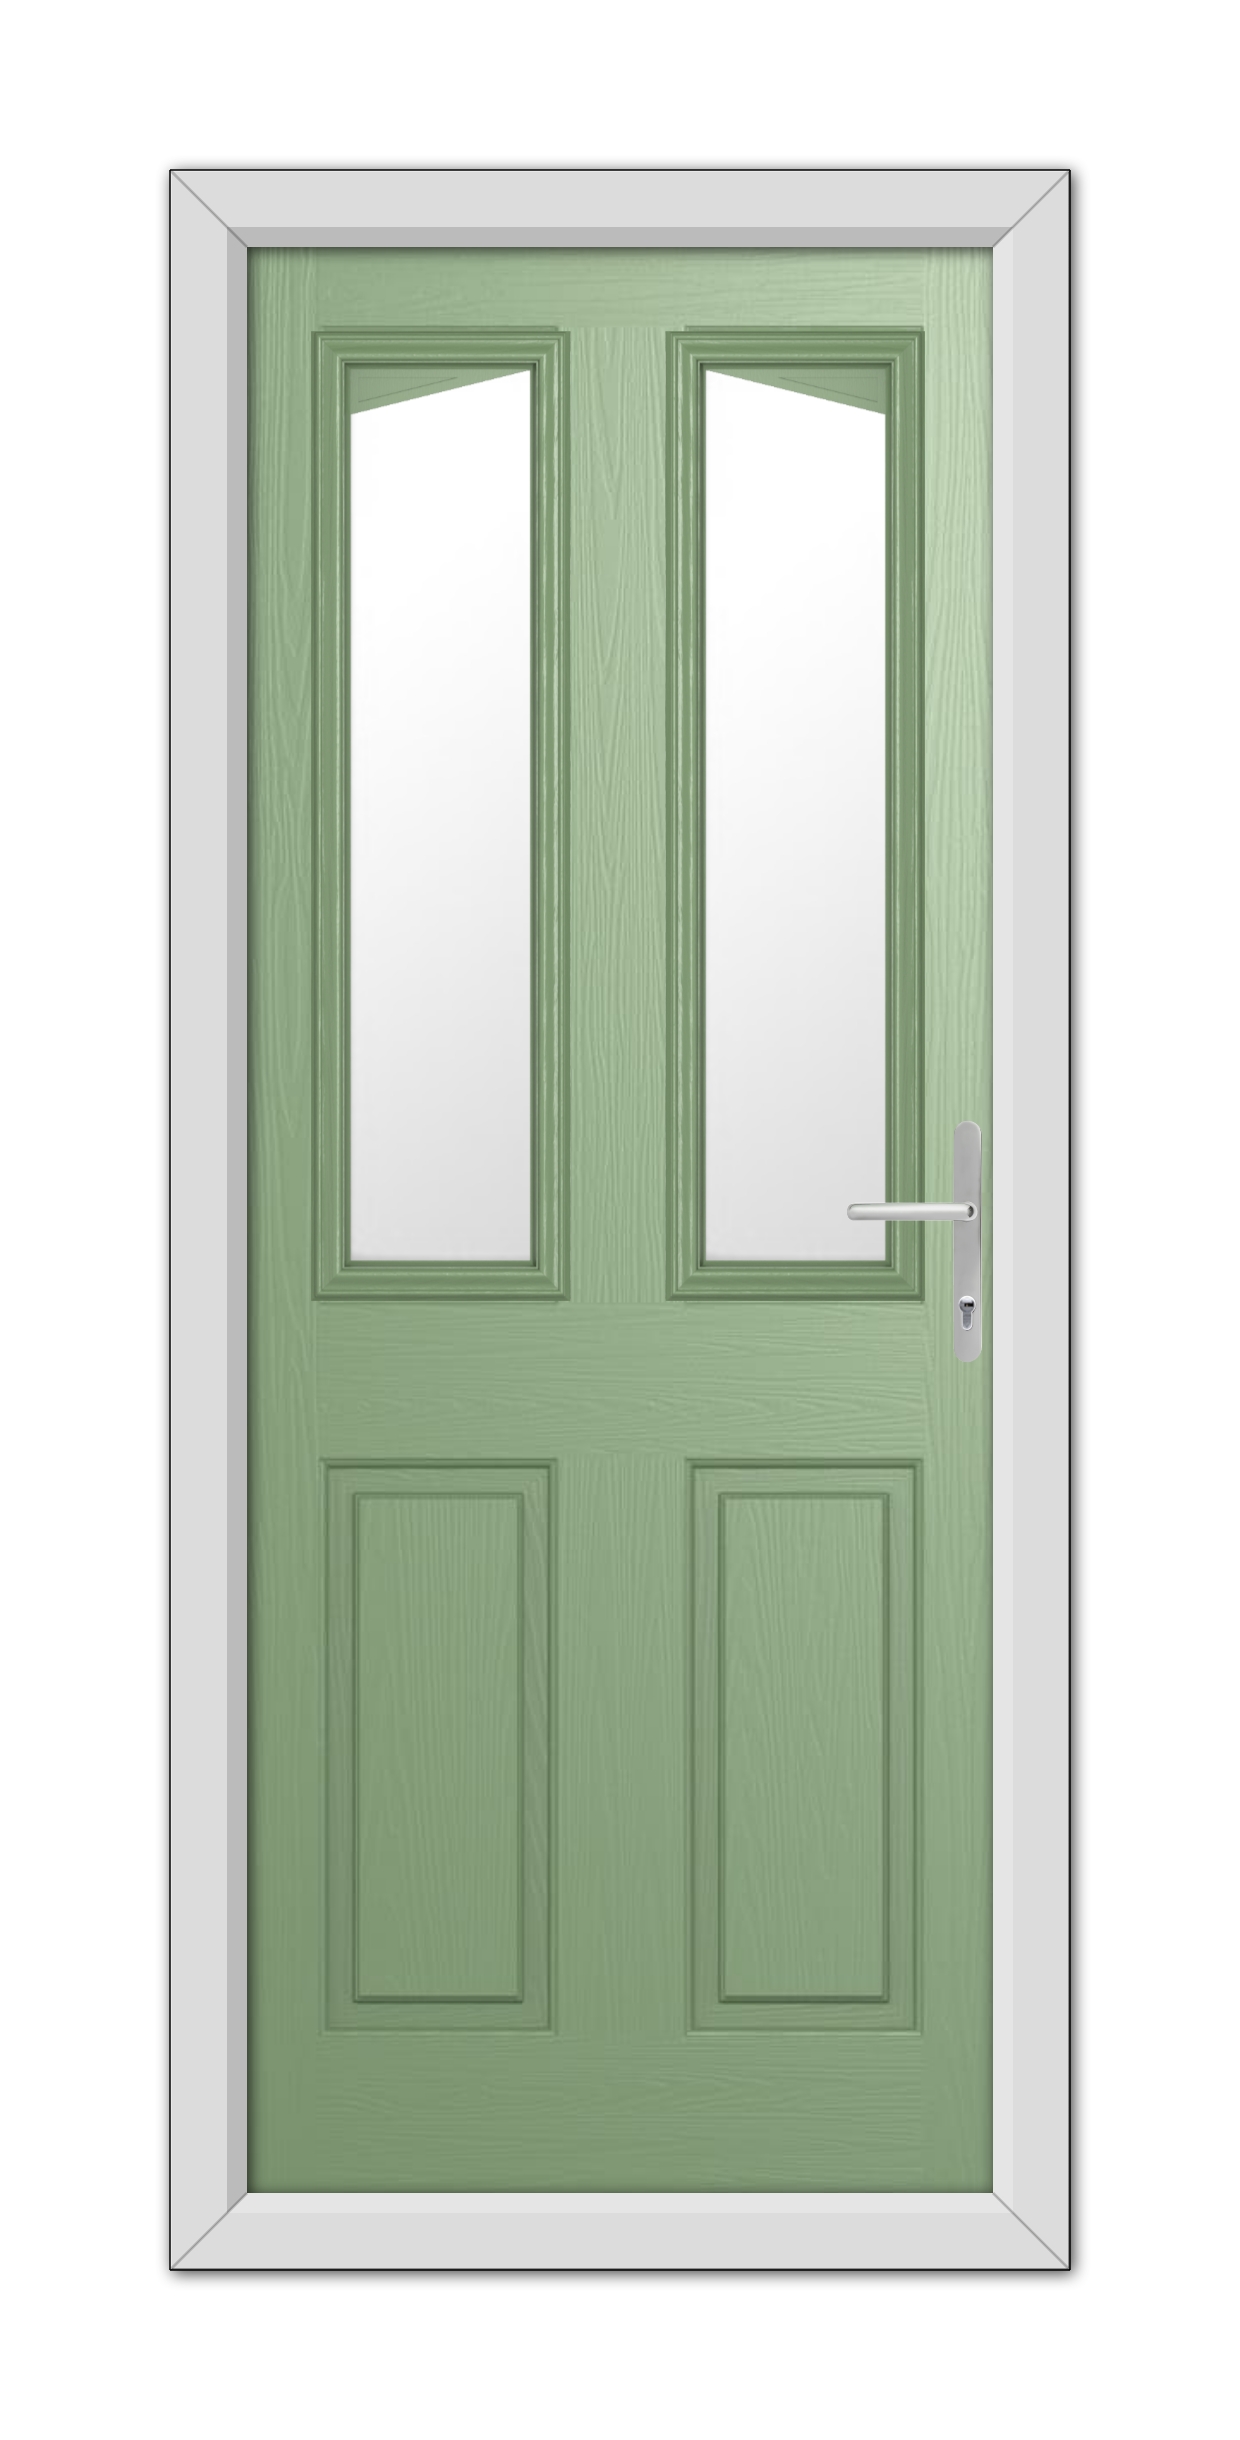 A Chartwell Green Highbury Composite Door with glass windows on the top half and panels on the bottom, framed in white, with a metallic handle on the right.